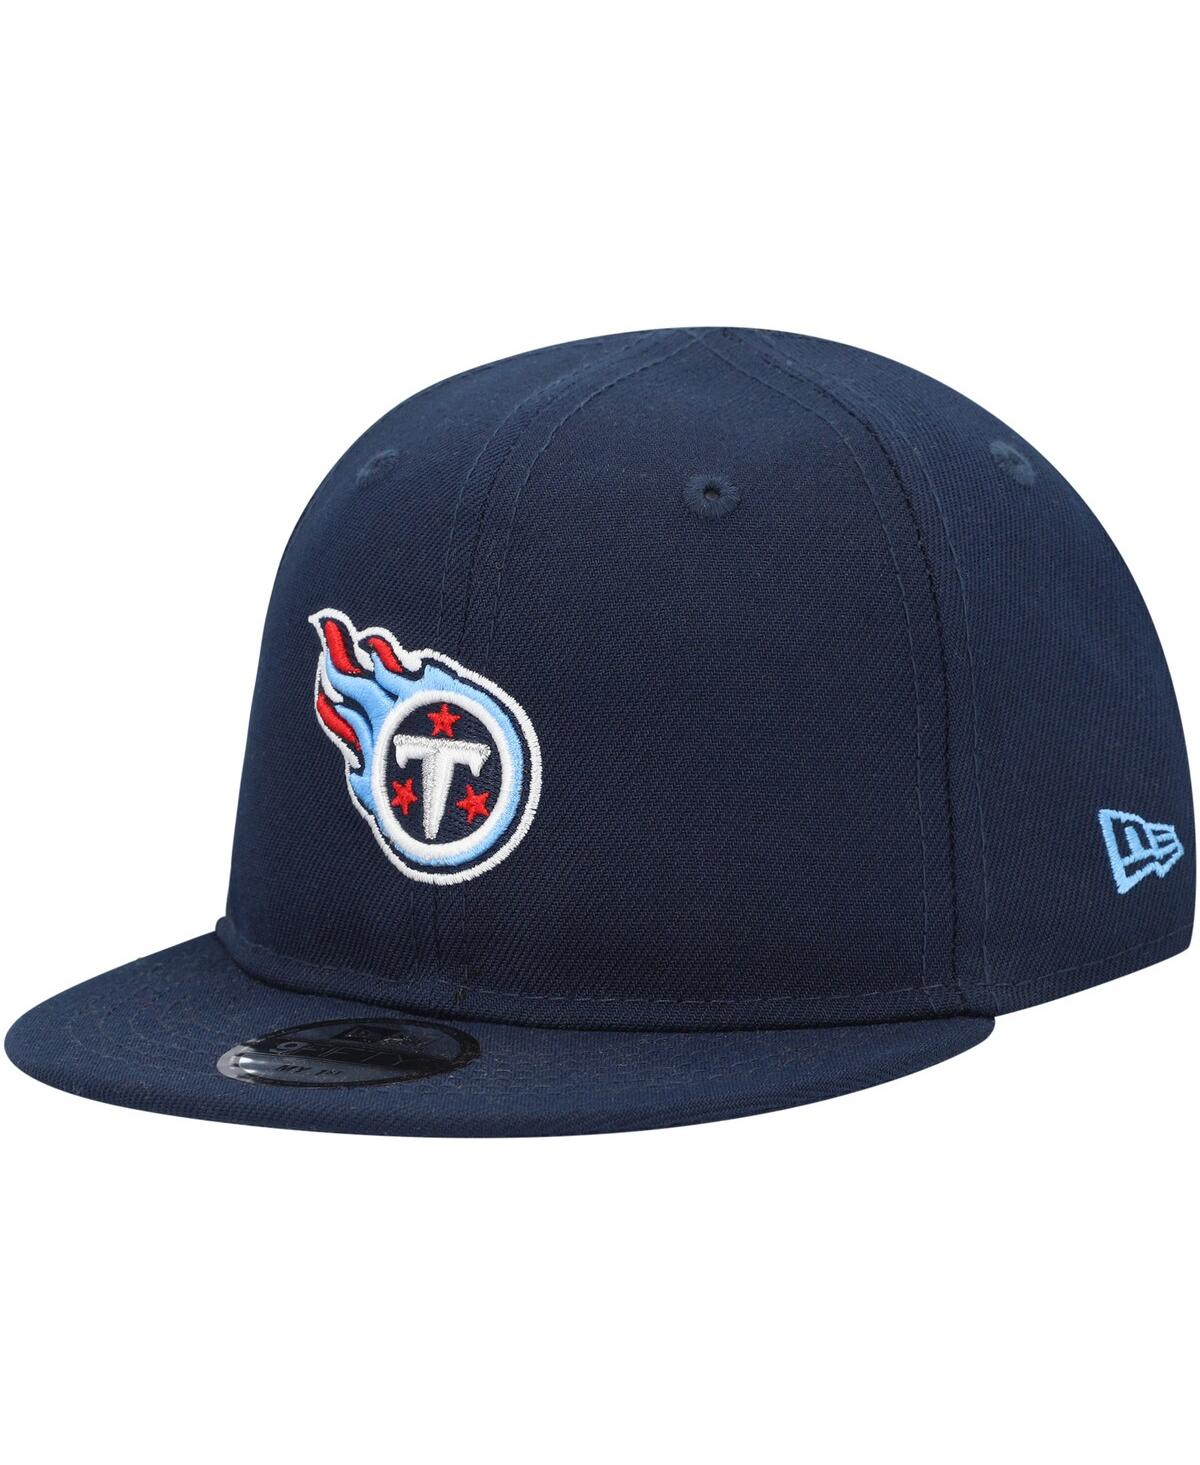 New Era Baby Boys And Girls  Navy Tennessee Titans My 1st 9fifty Adjustable Hat